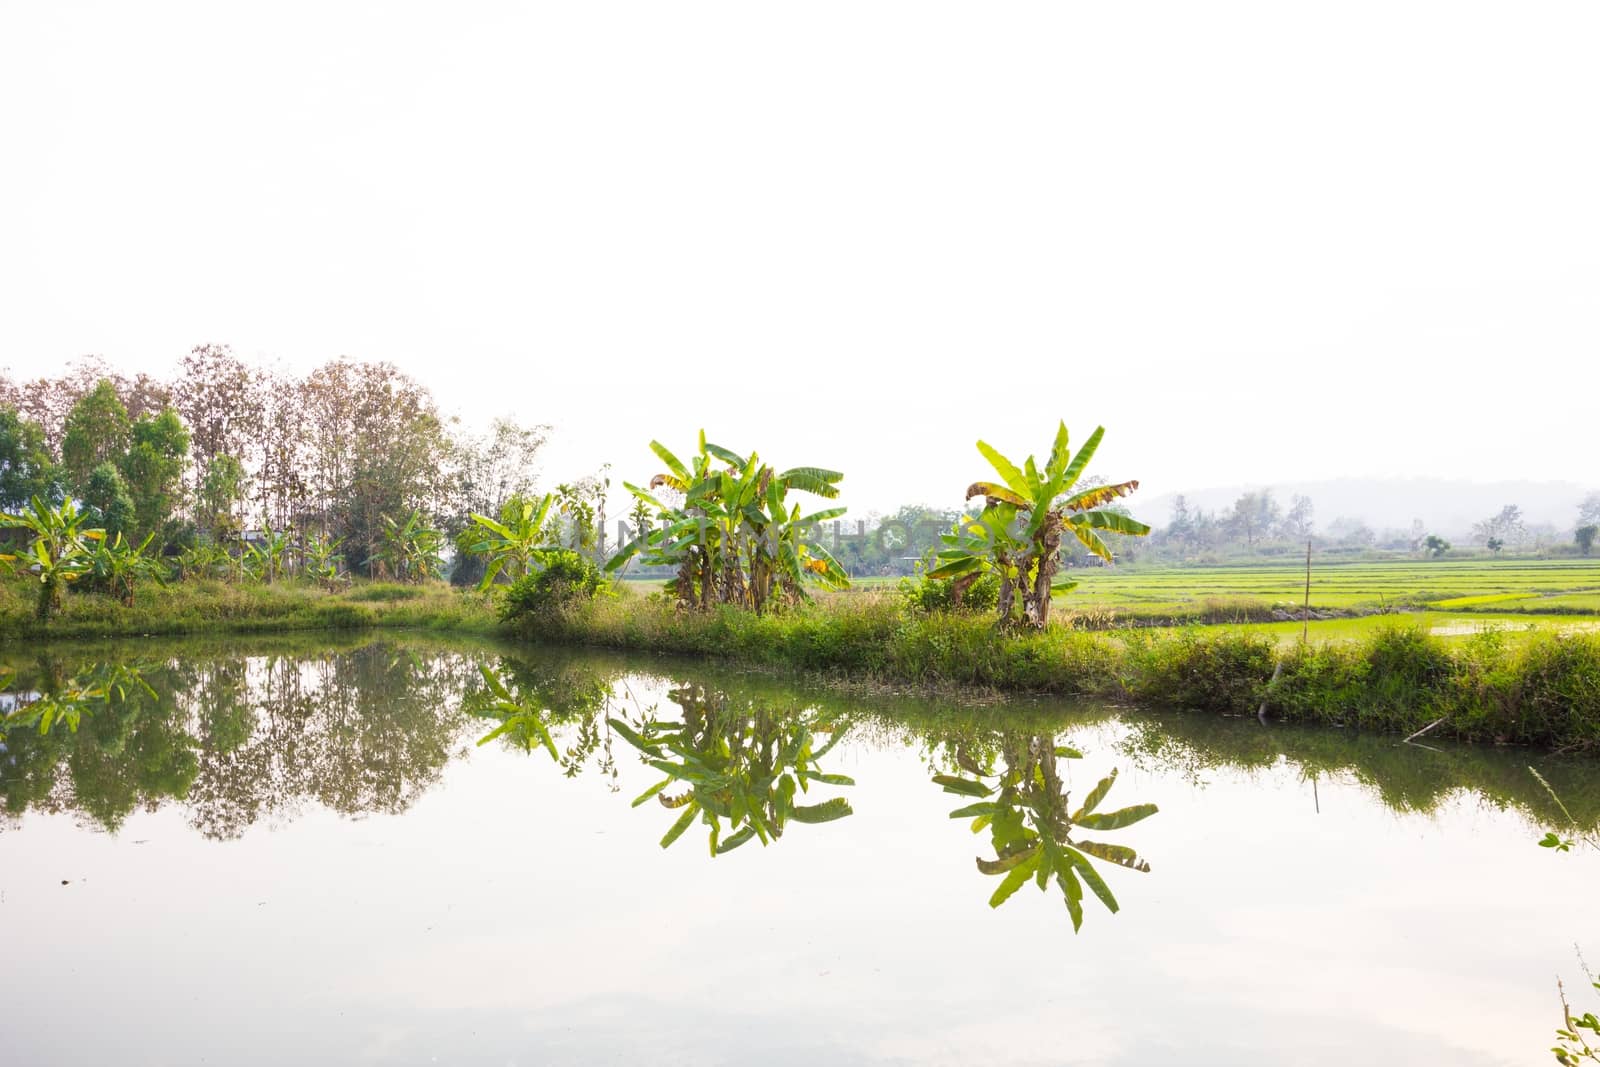 small lake near banana tree and rice field in Thailand by a3701027